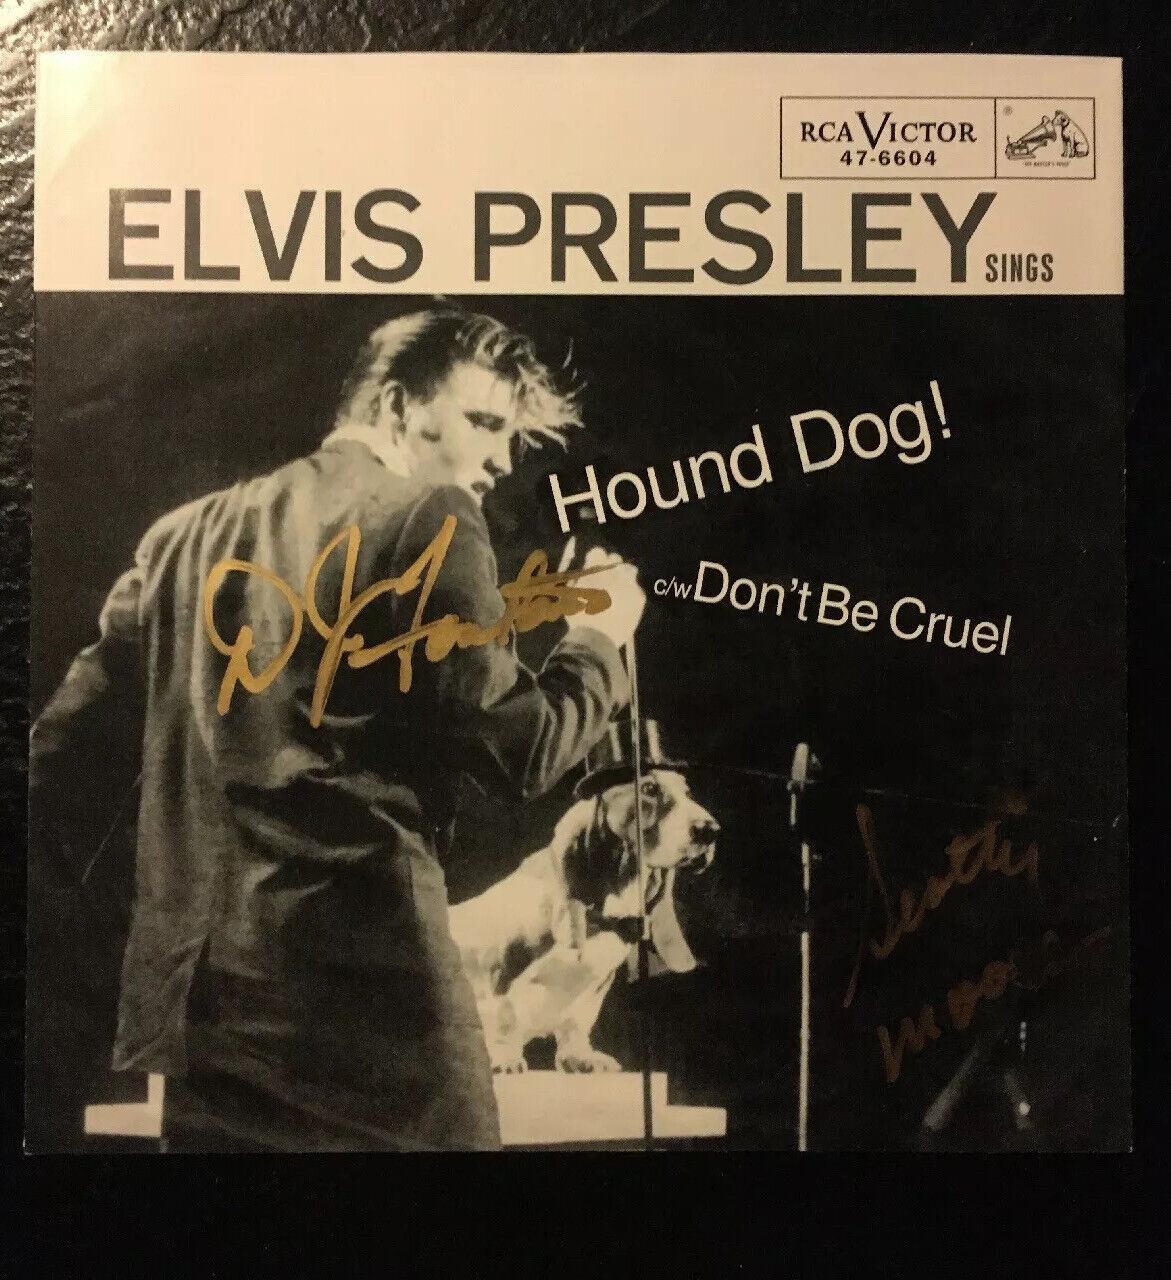 Elvis Presley, Hound Dog/Don’t Be Cruel 7” Signed By Scotty Moore And DJ Fontana